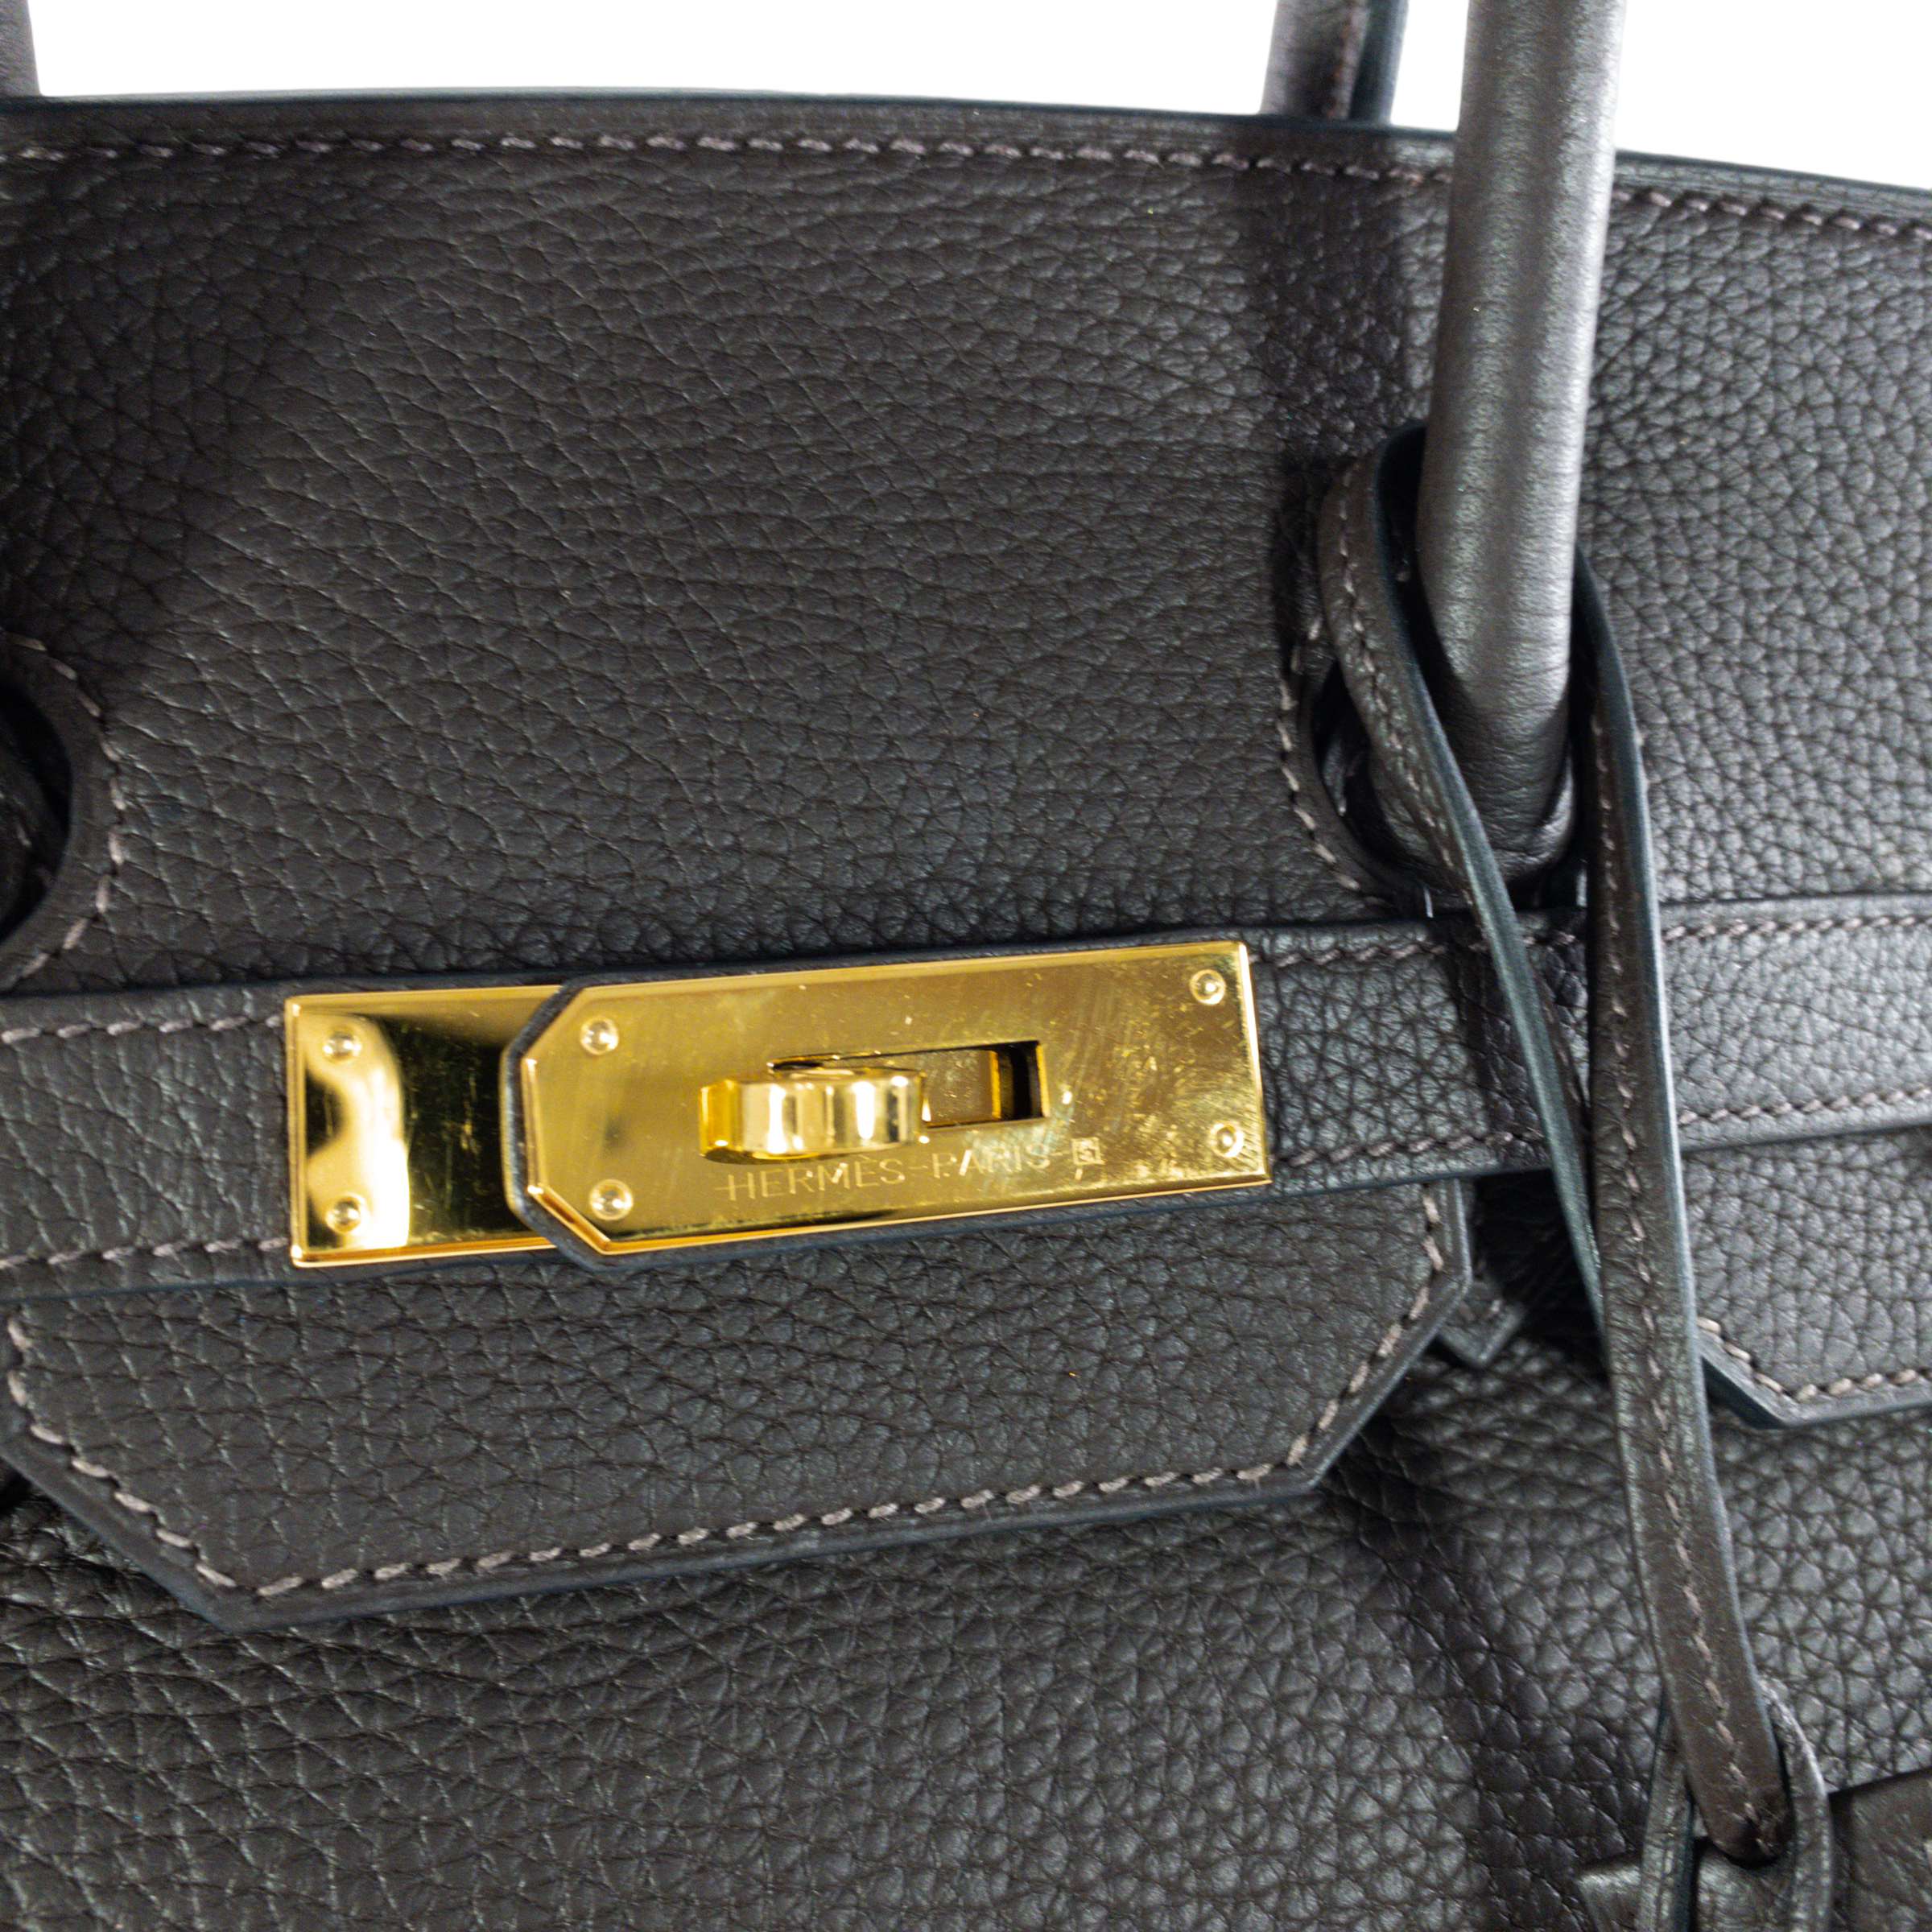 FOR SALE: AUTHENTIC HERMES BIRKIN 35 ETOUPE GHW